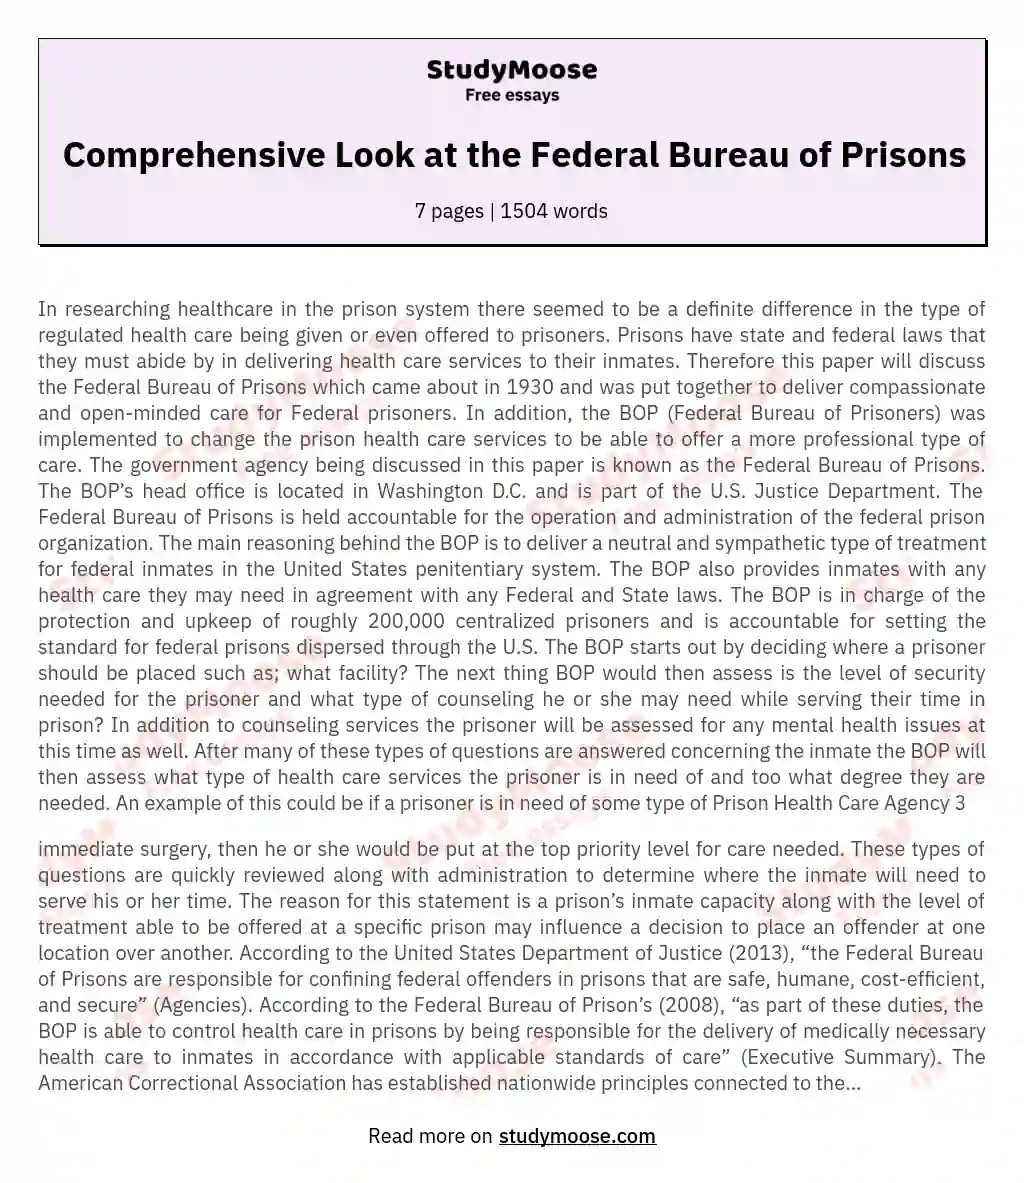 Comprehensive Look at the Federal Bureau of Prisons essay